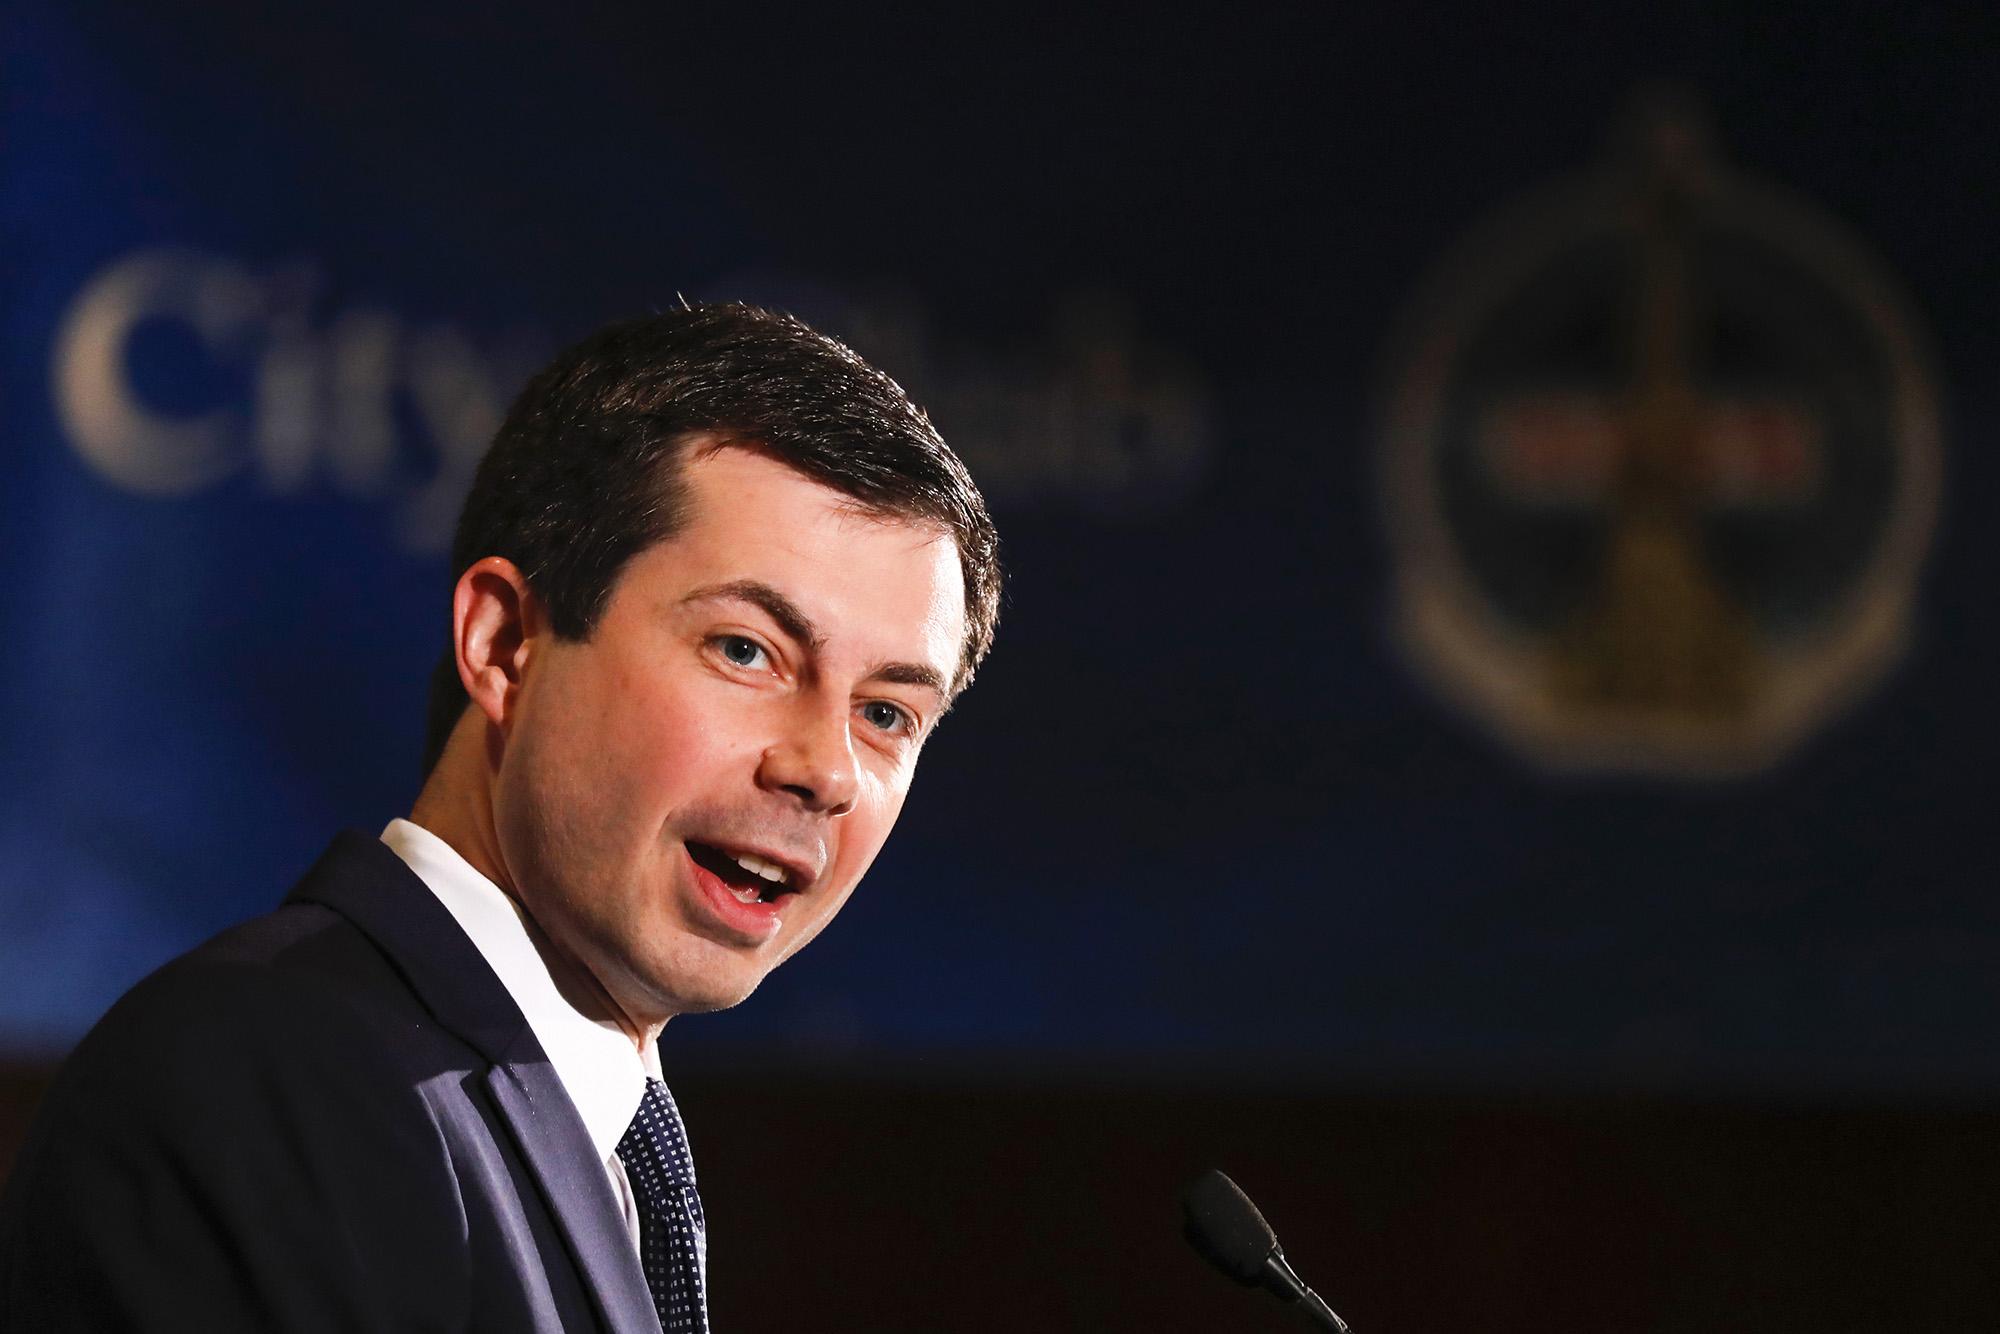 Presidential candidate and South Bend, Ind., Mayor Pete Buttigieg speaks at the City Club of Chicago luncheon in Chicago on Thursday, May 16, 2019. (Jose M. Osorio/Chicago Tribune/TNS)